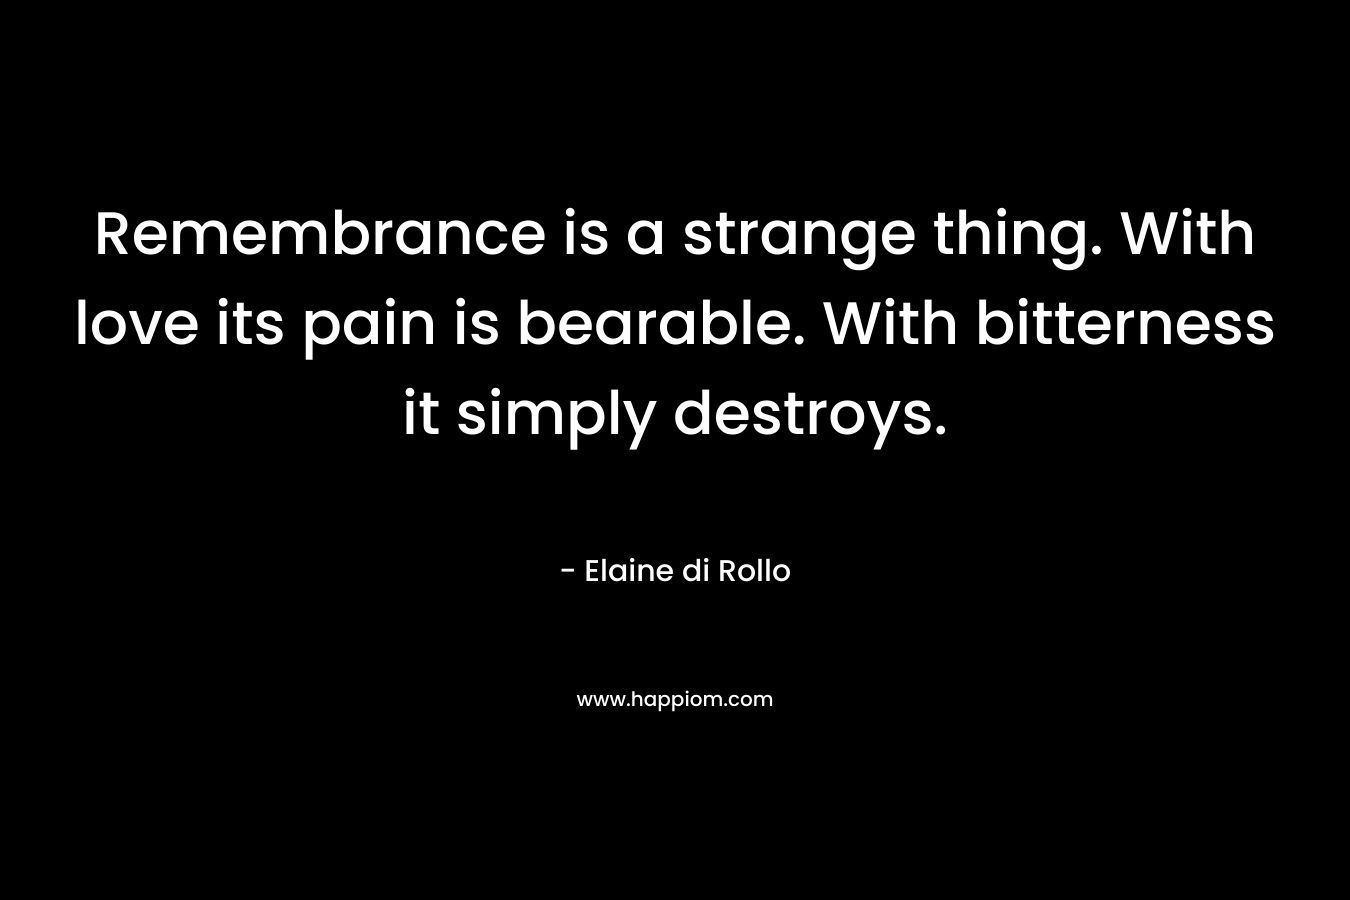 Remembrance is a strange thing. With love its pain is bearable. With bitterness it simply destroys. – Elaine di Rollo